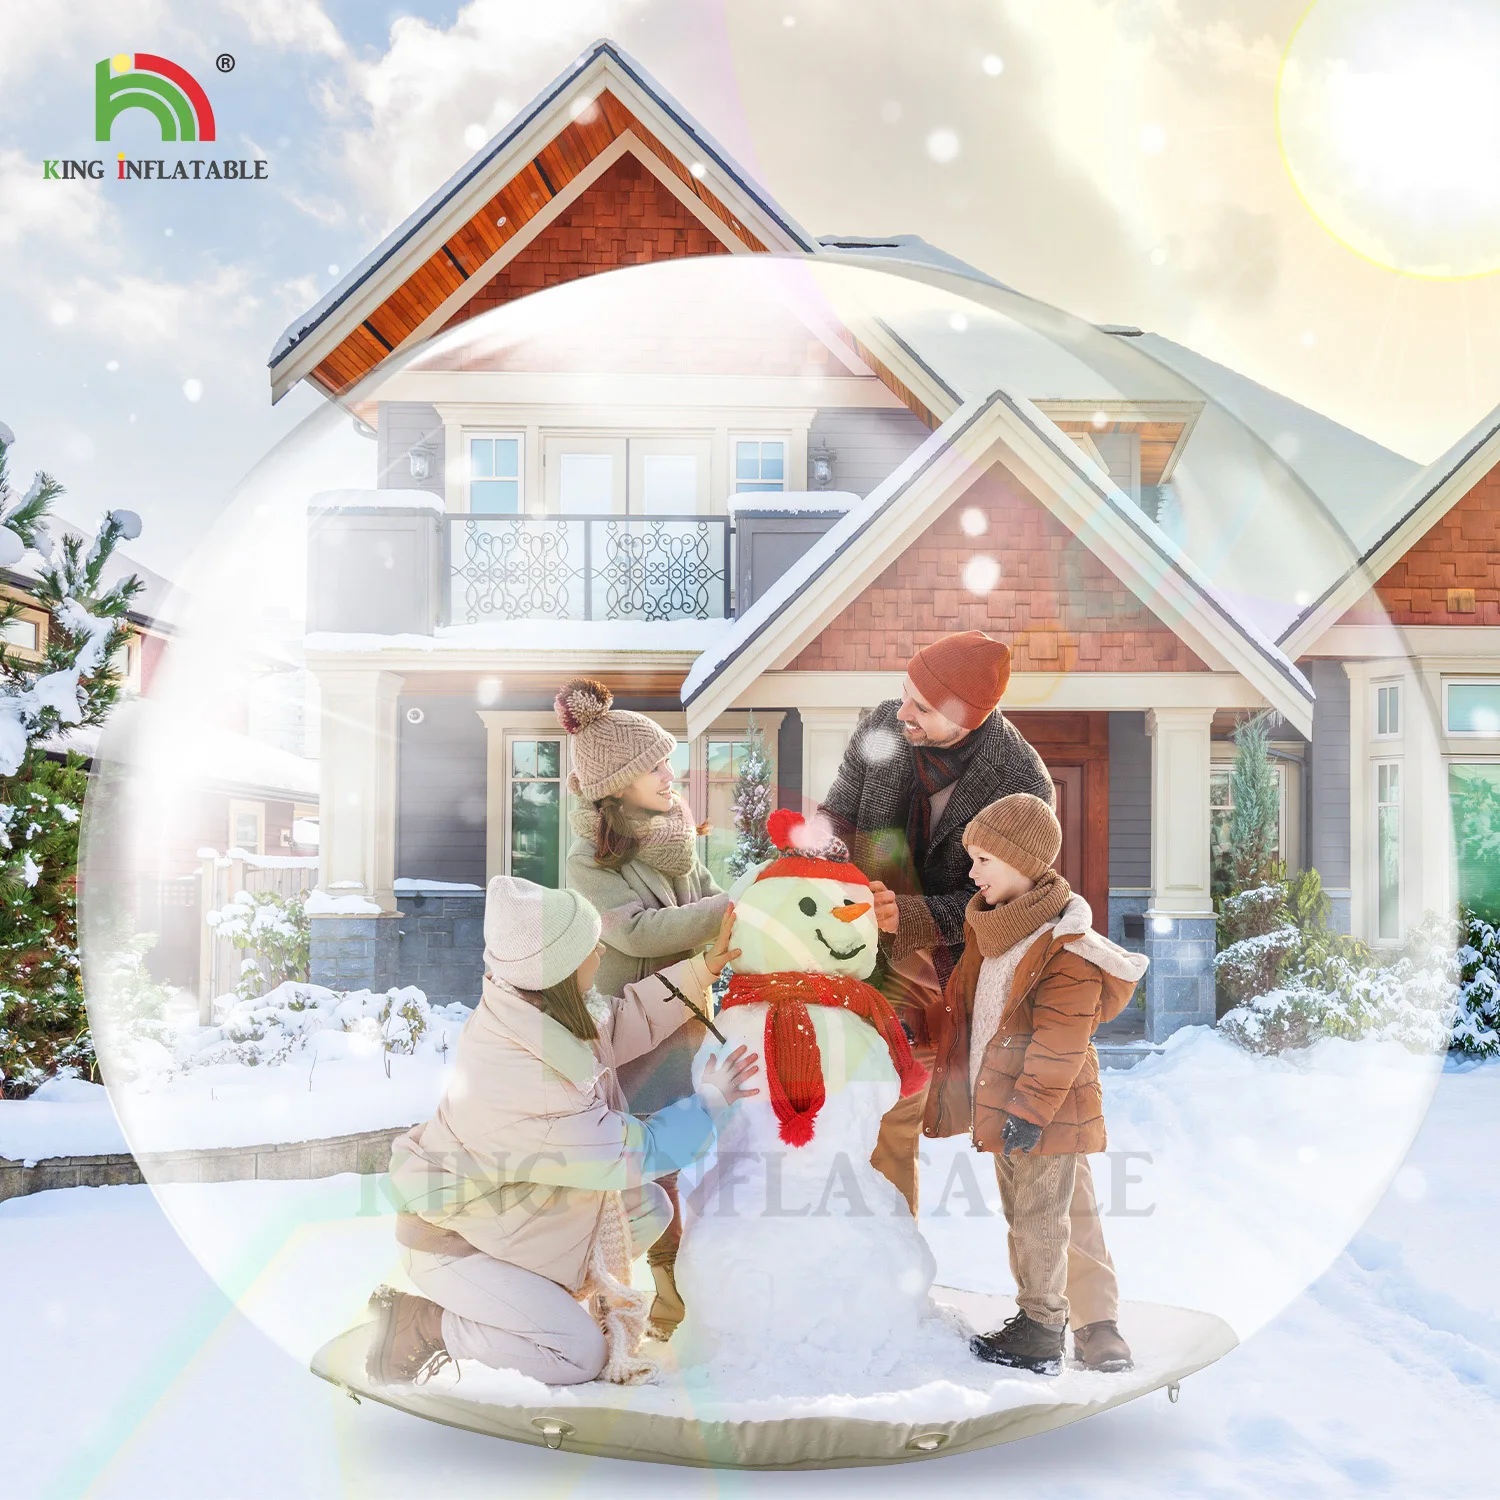 10ft/3m PVC Transparent Bubble Tent Giant Inflatable Snowball Christmas Snow Globe Dome Xmas Outdoor Decoration With Blower misecu 4mp uhd 8mp 4k poe ptz dome cctv surveillance security camera h 265 onvif outdoor waterproof ai human motion detect p2p